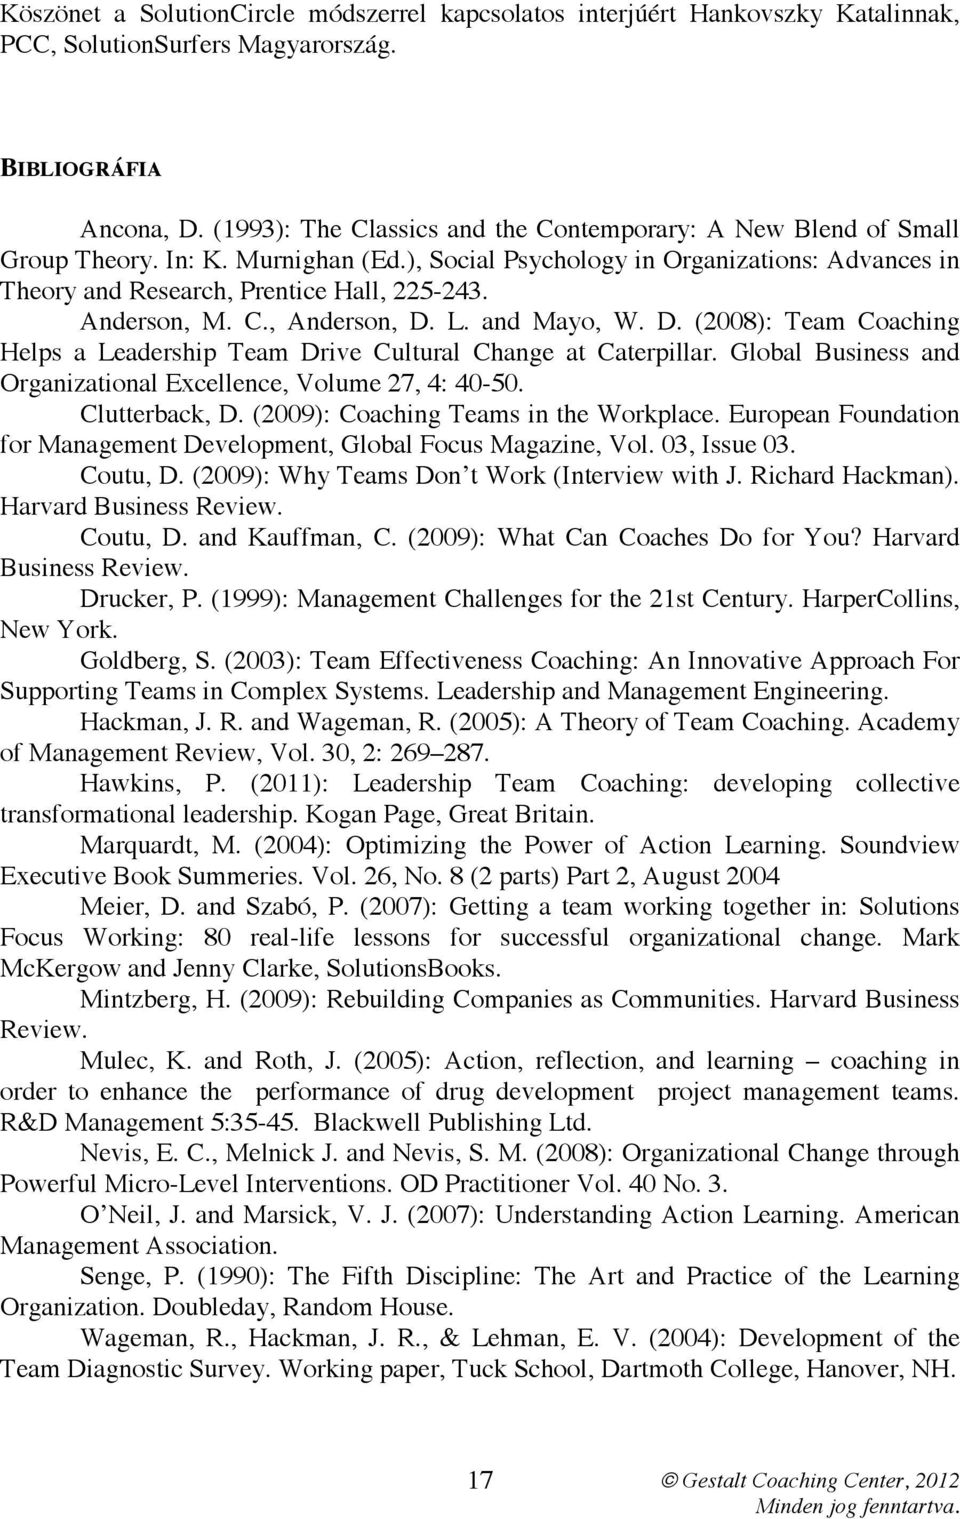 Anderson, M. C., Anderson, D. L. and Mayo, W. D. (2008): Team Coaching Helps a Leadership Team Drive Cultural Change at Caterpillar. Global Business and Organizational Excellence, Volume 27, 4: 40-50.